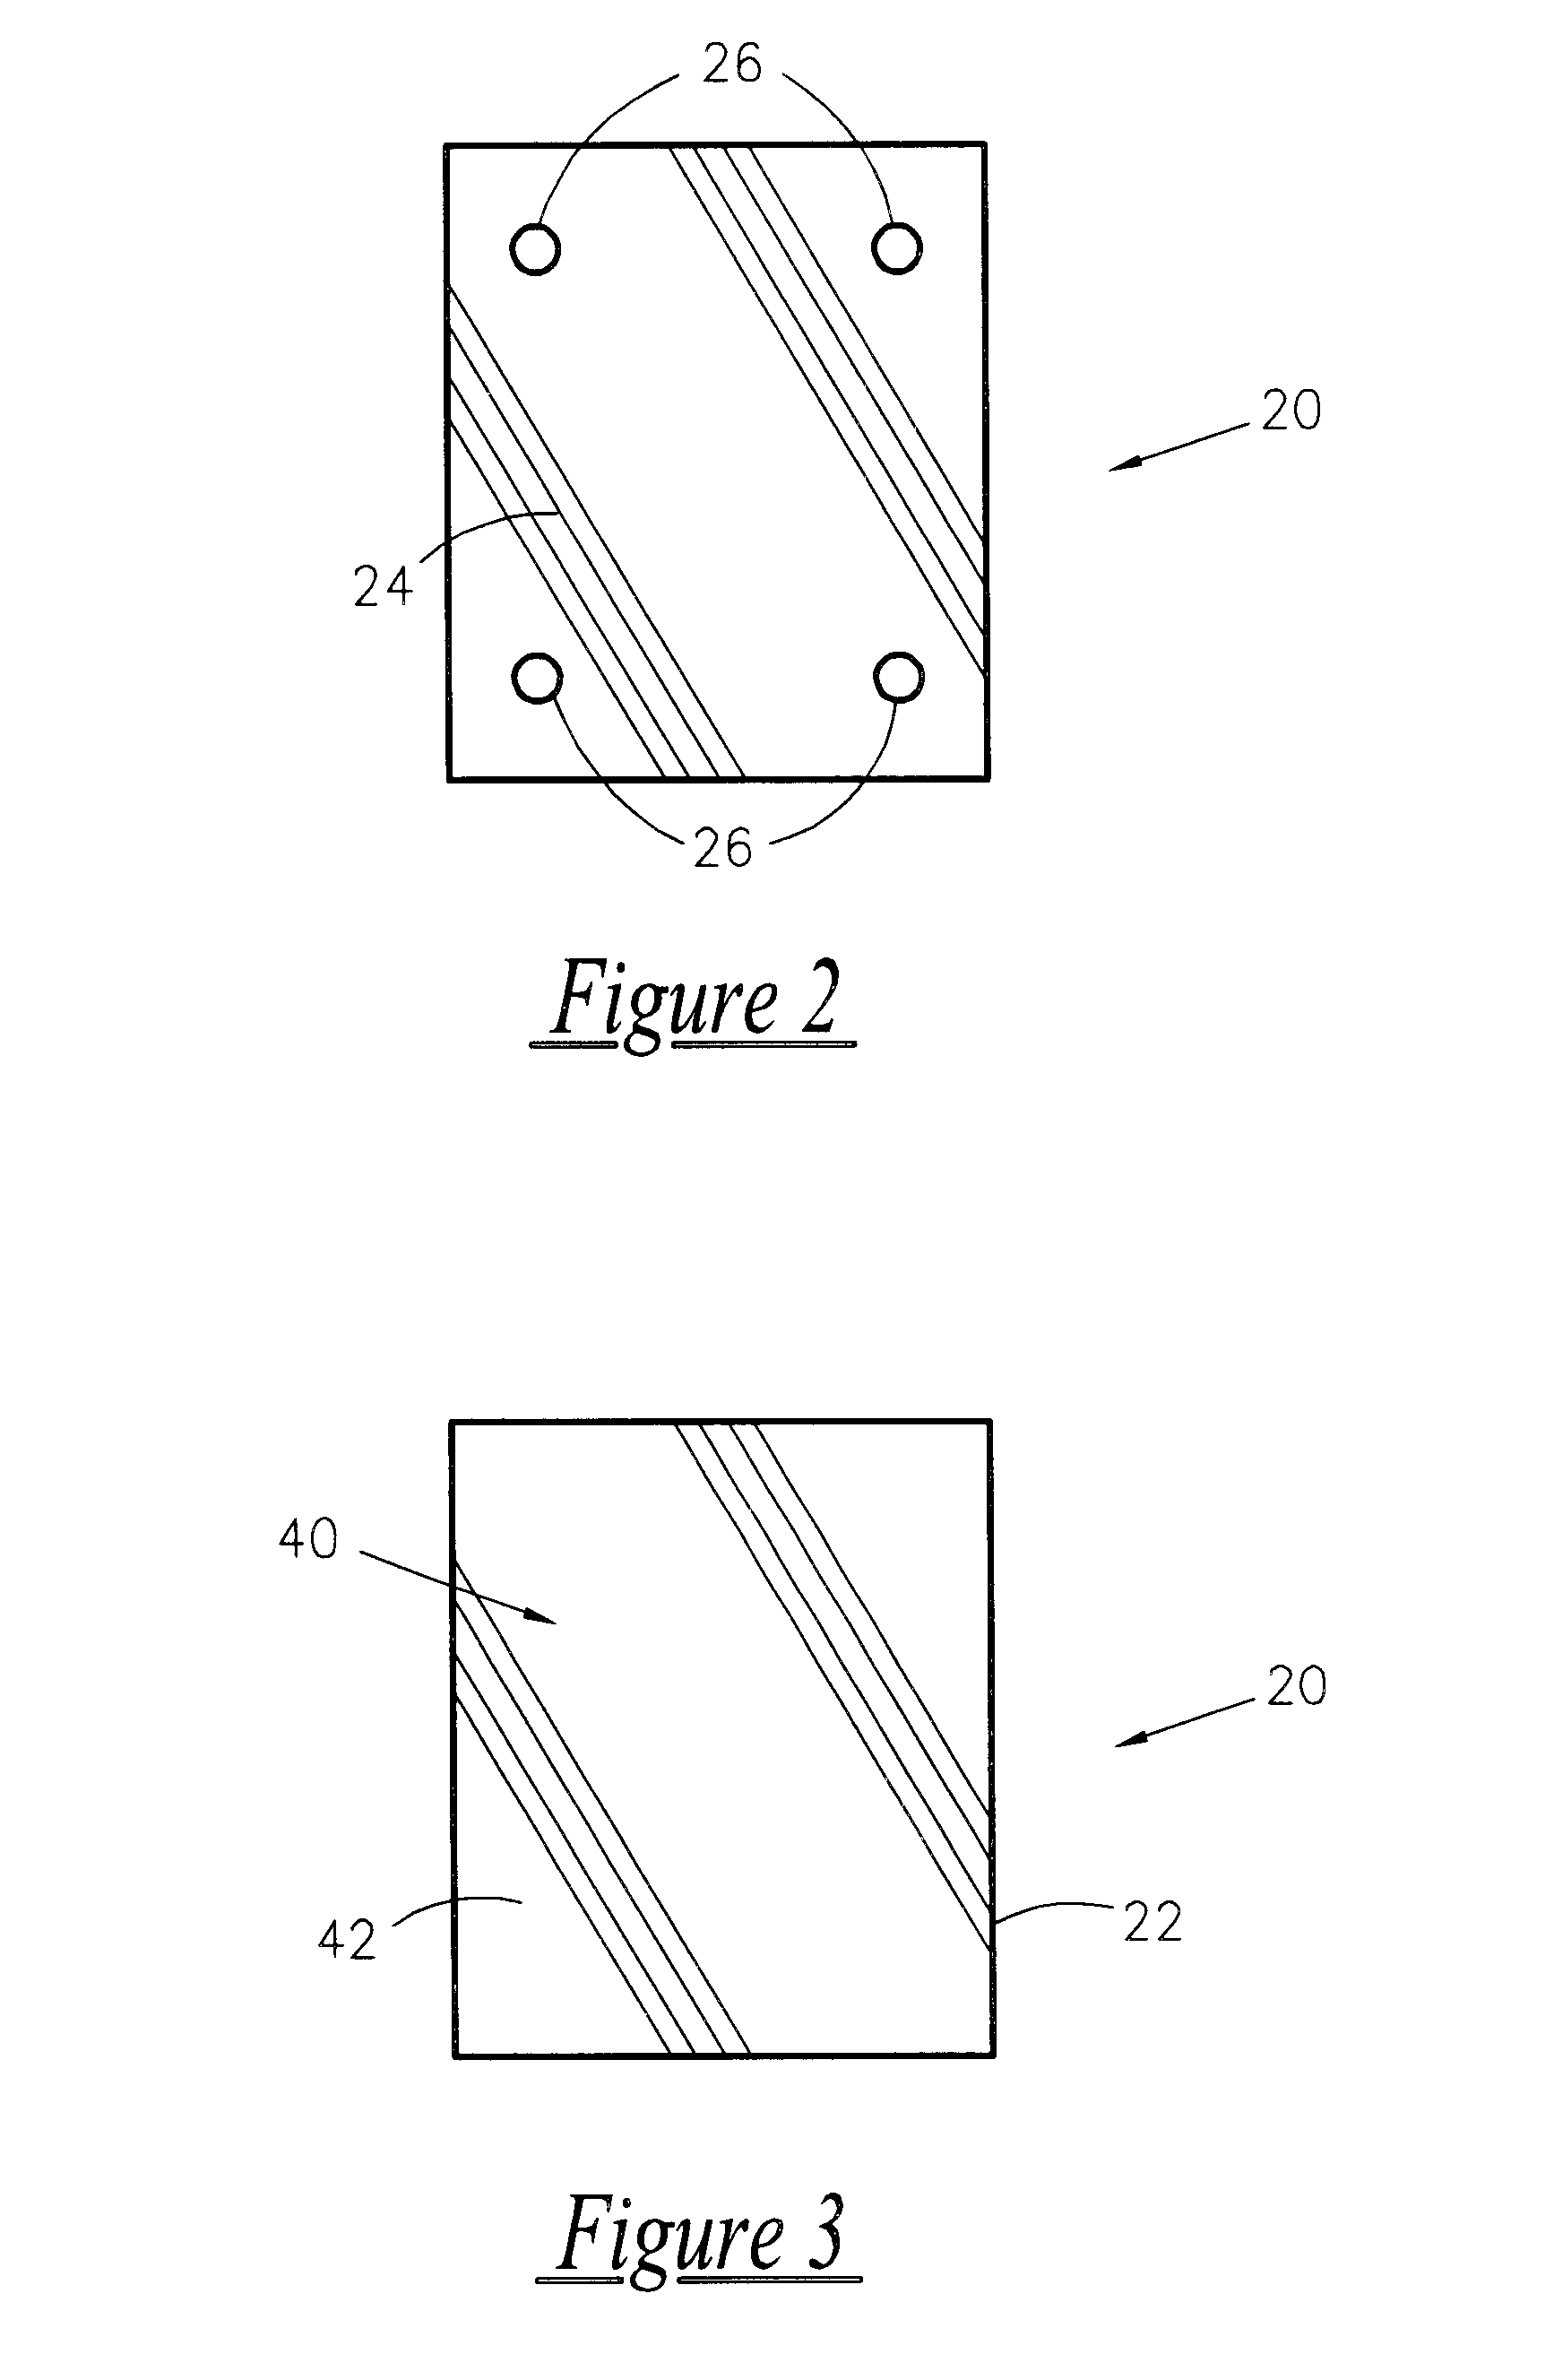 Removably attachable wheel assembly for article transporting containers